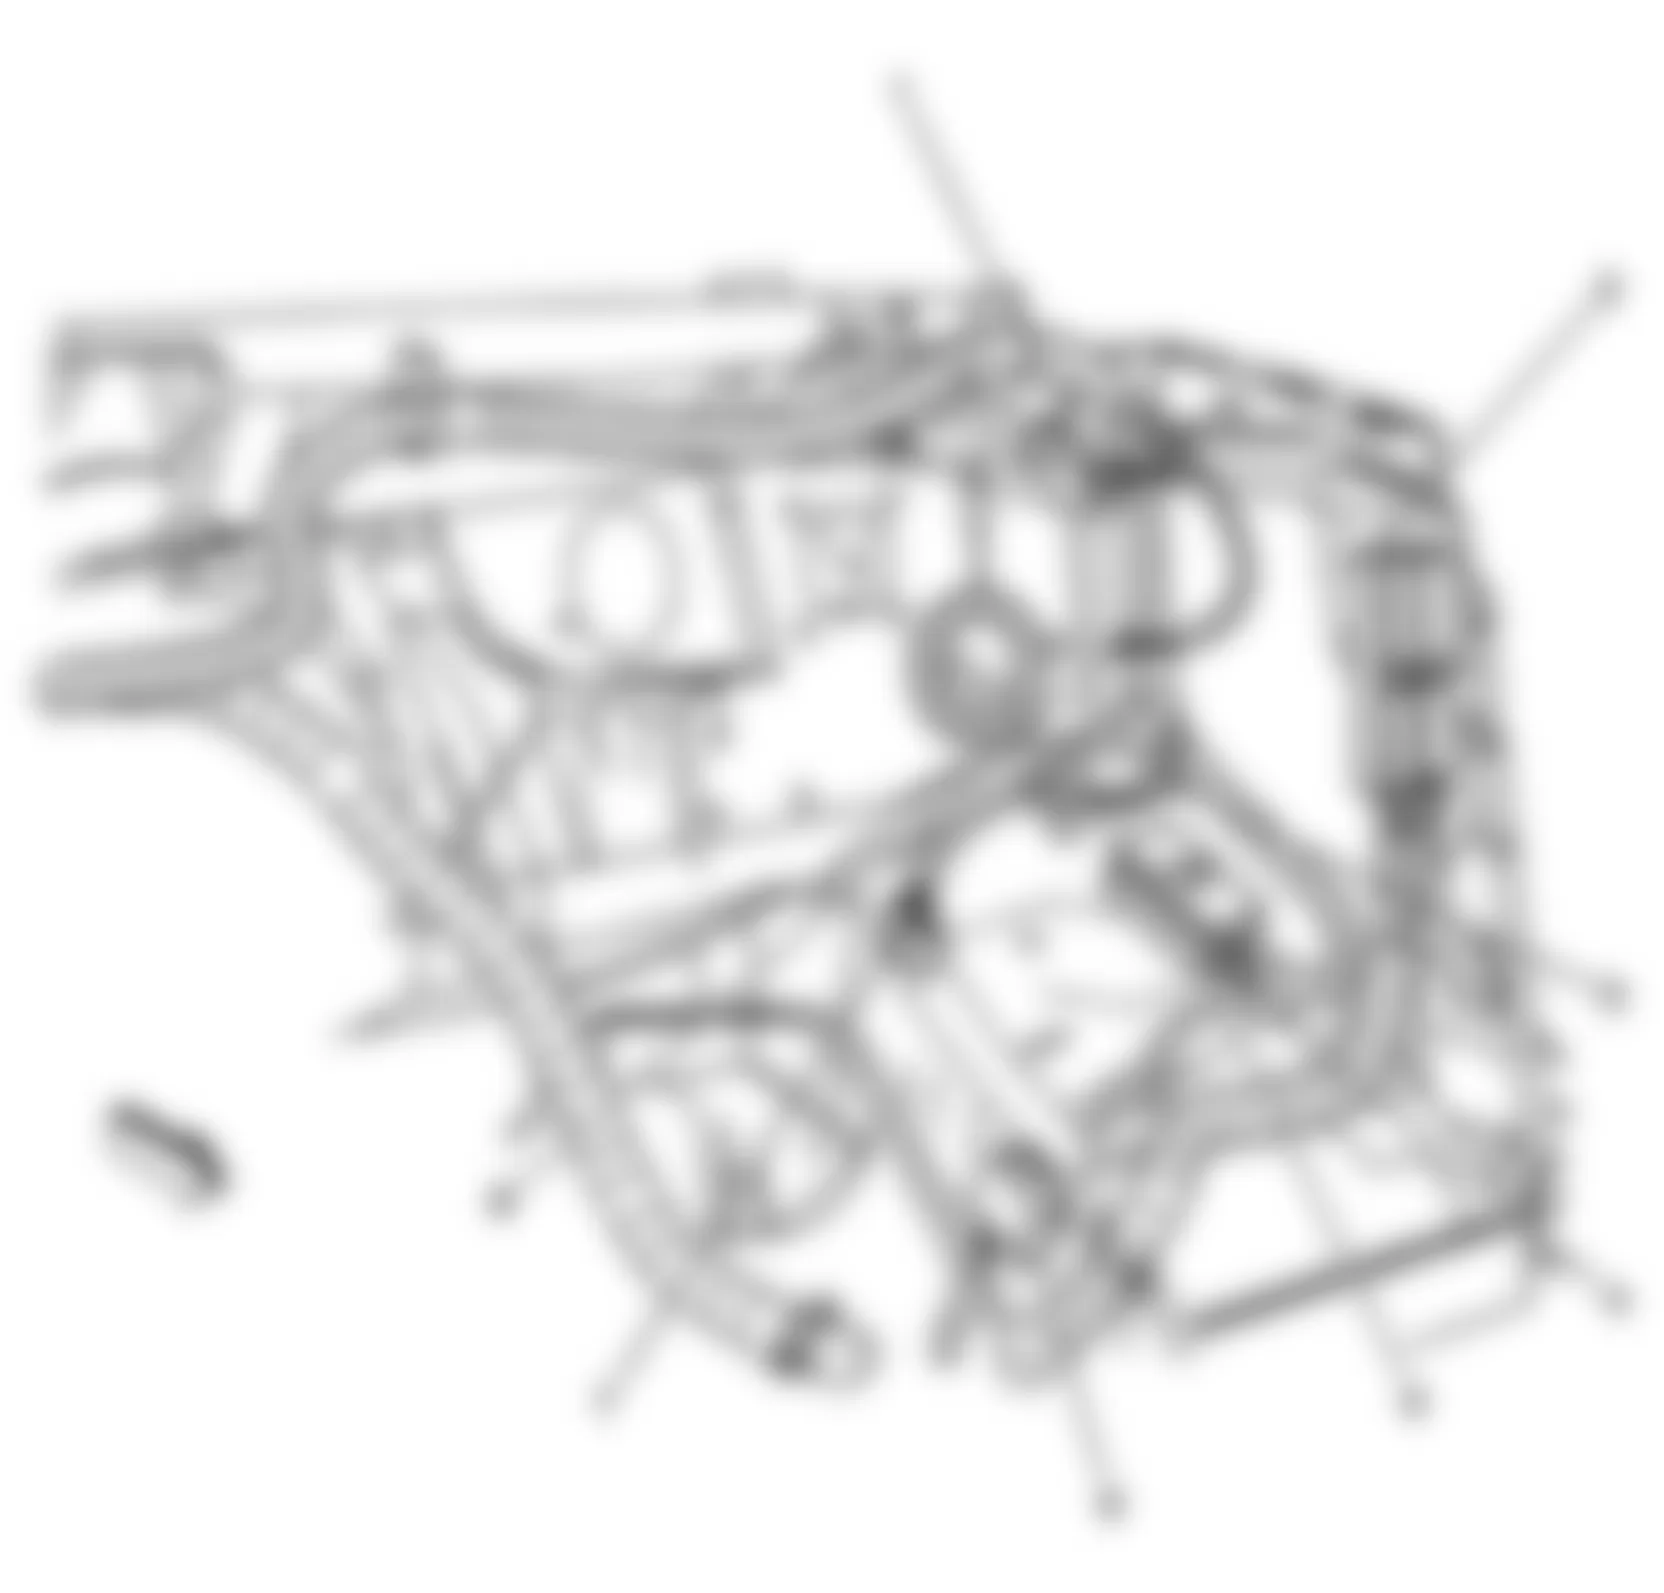 GMC Savana G3500 2009 - Component Locations -  Left Rear Of Engine Compartment